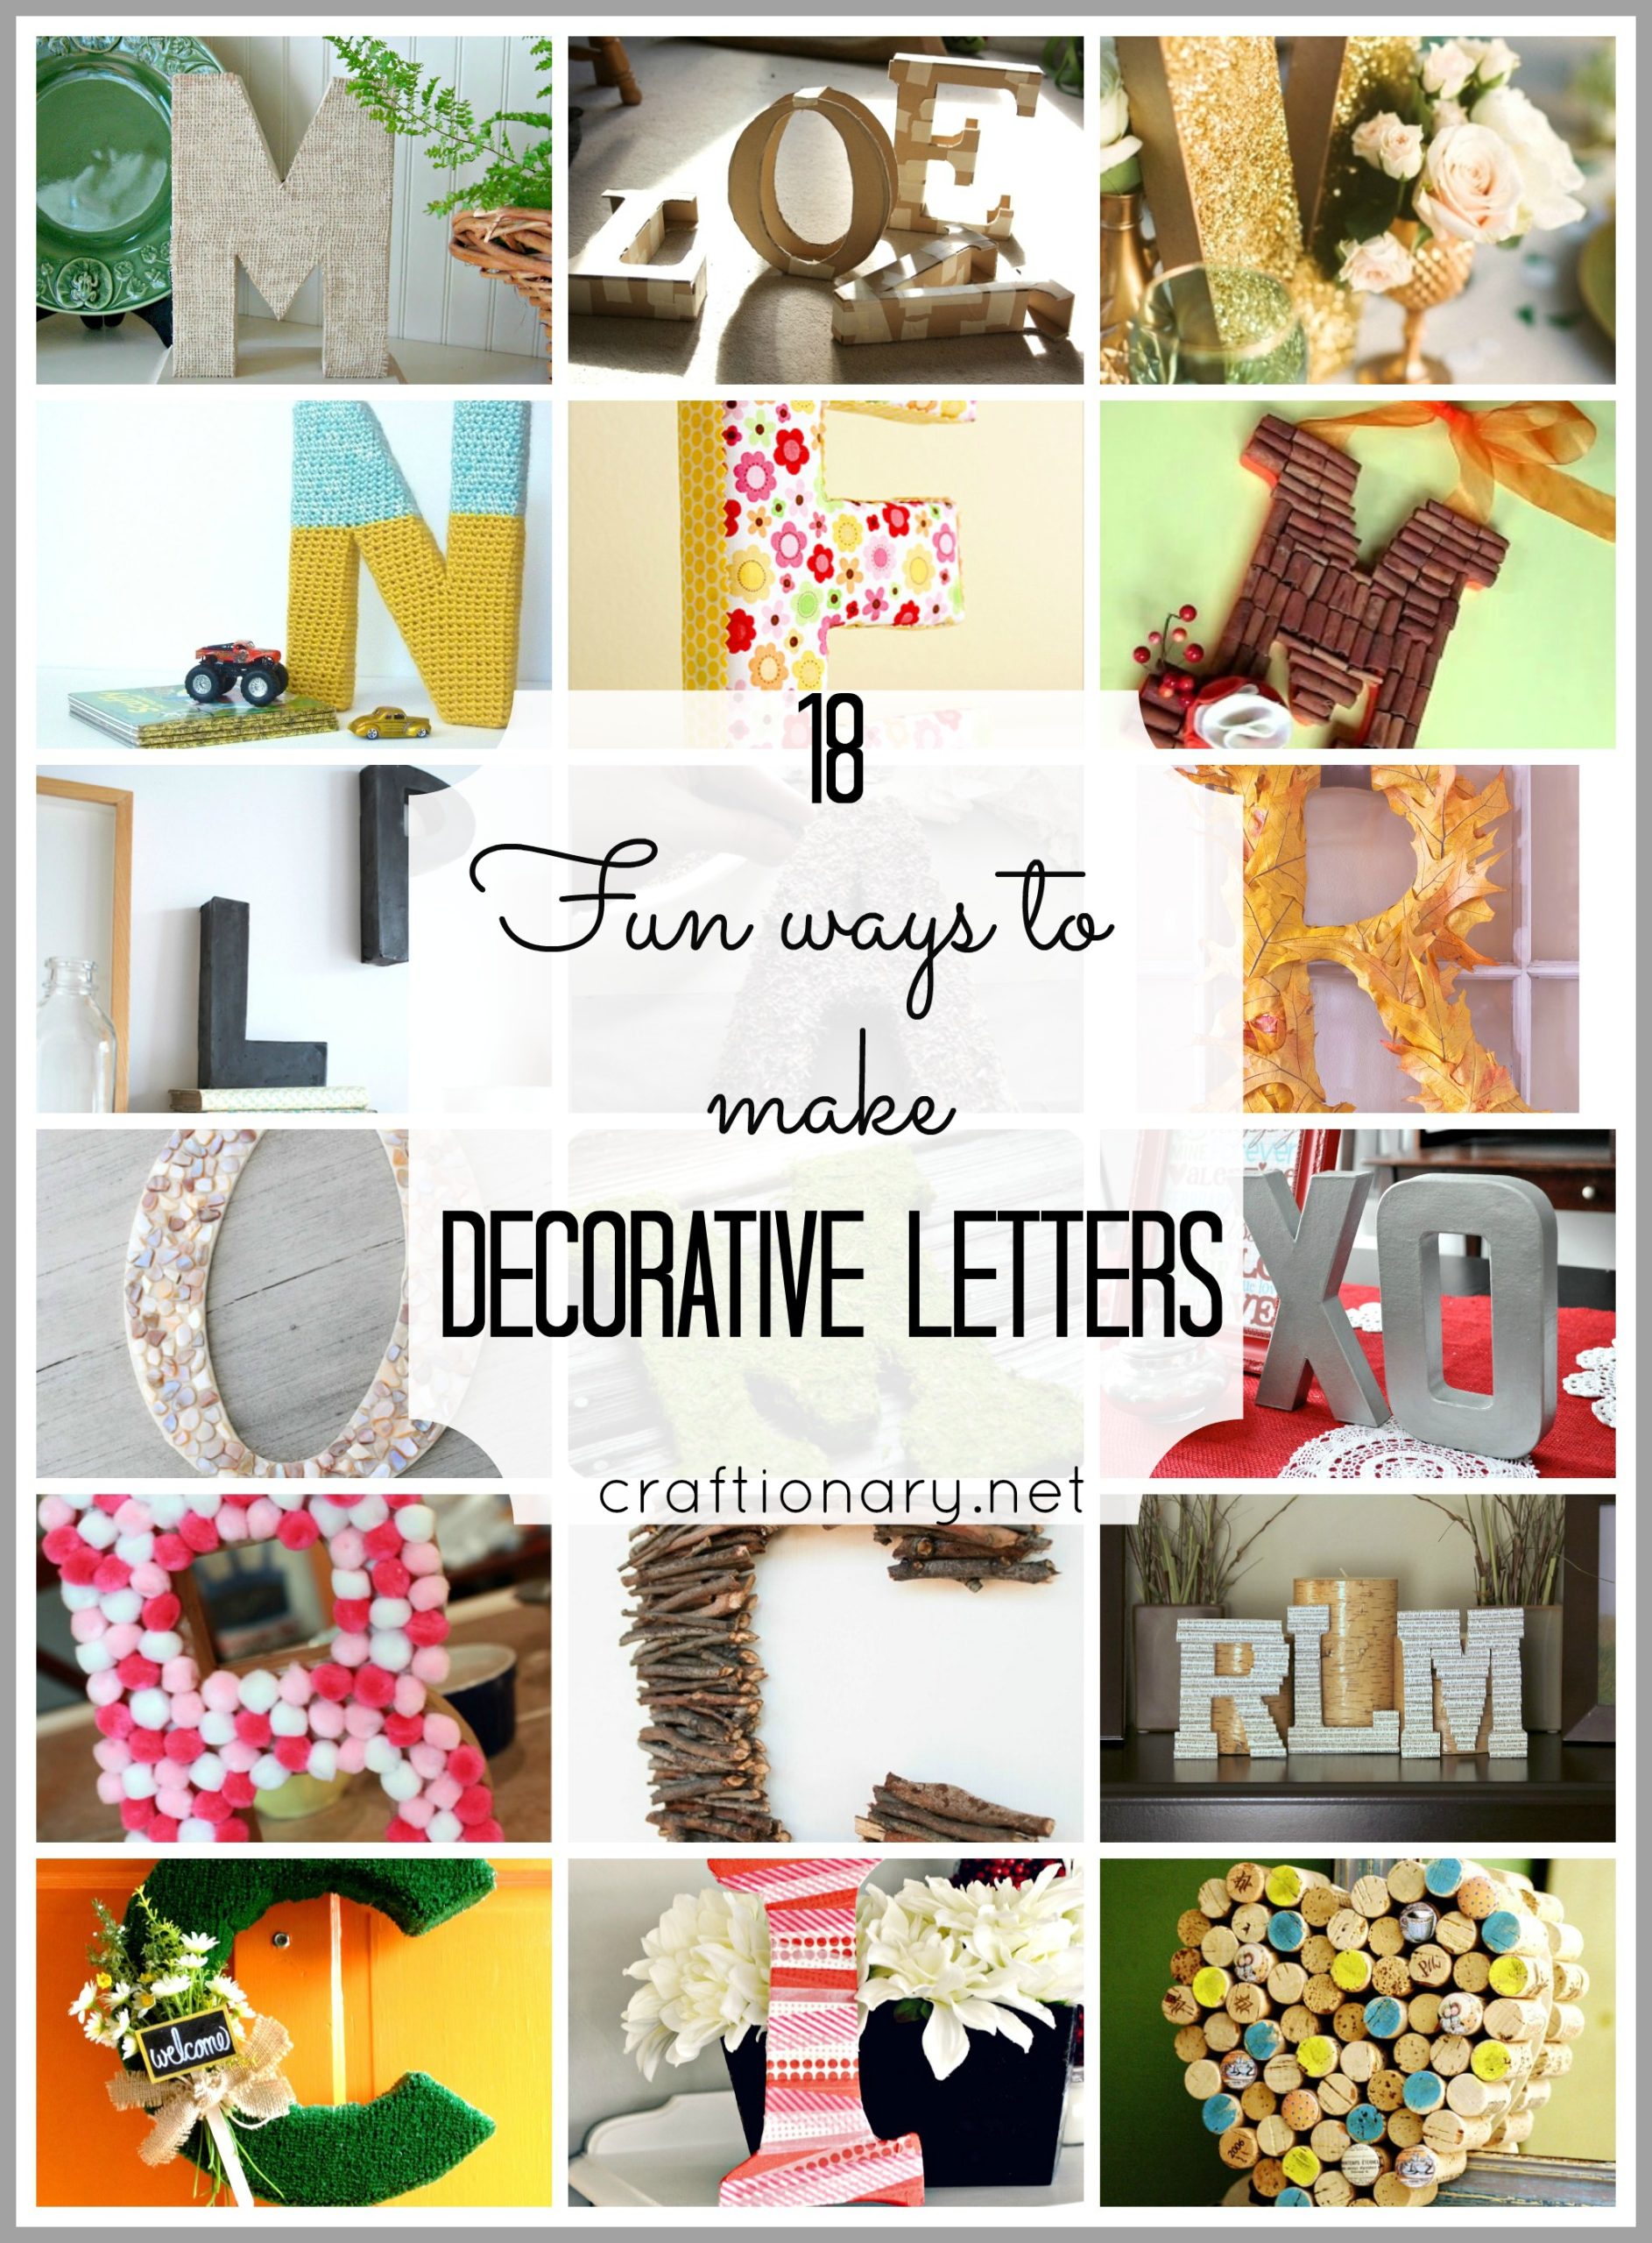 3 Amazing Wooden Letter Craft Ideas, Wood, D.I.Y.